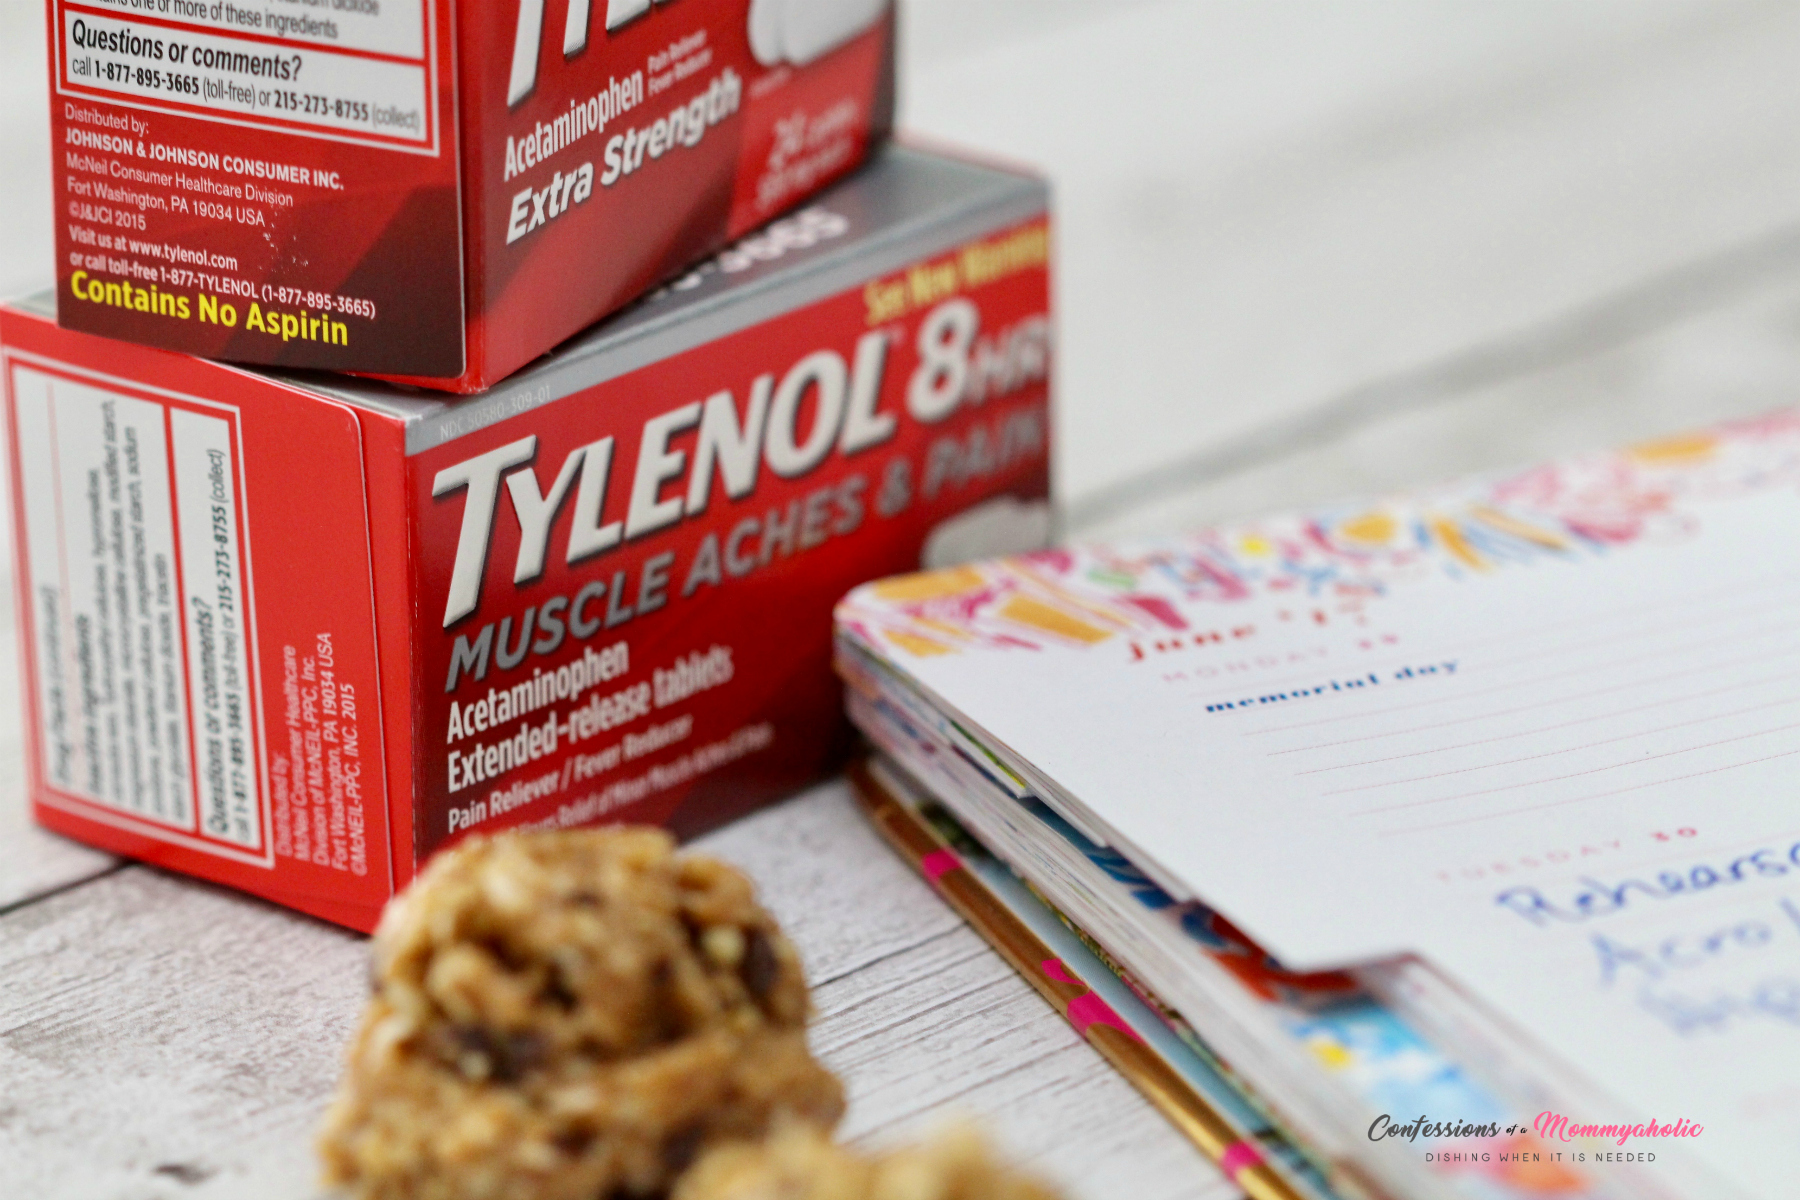 Planner Tylenol and Cookie Ball